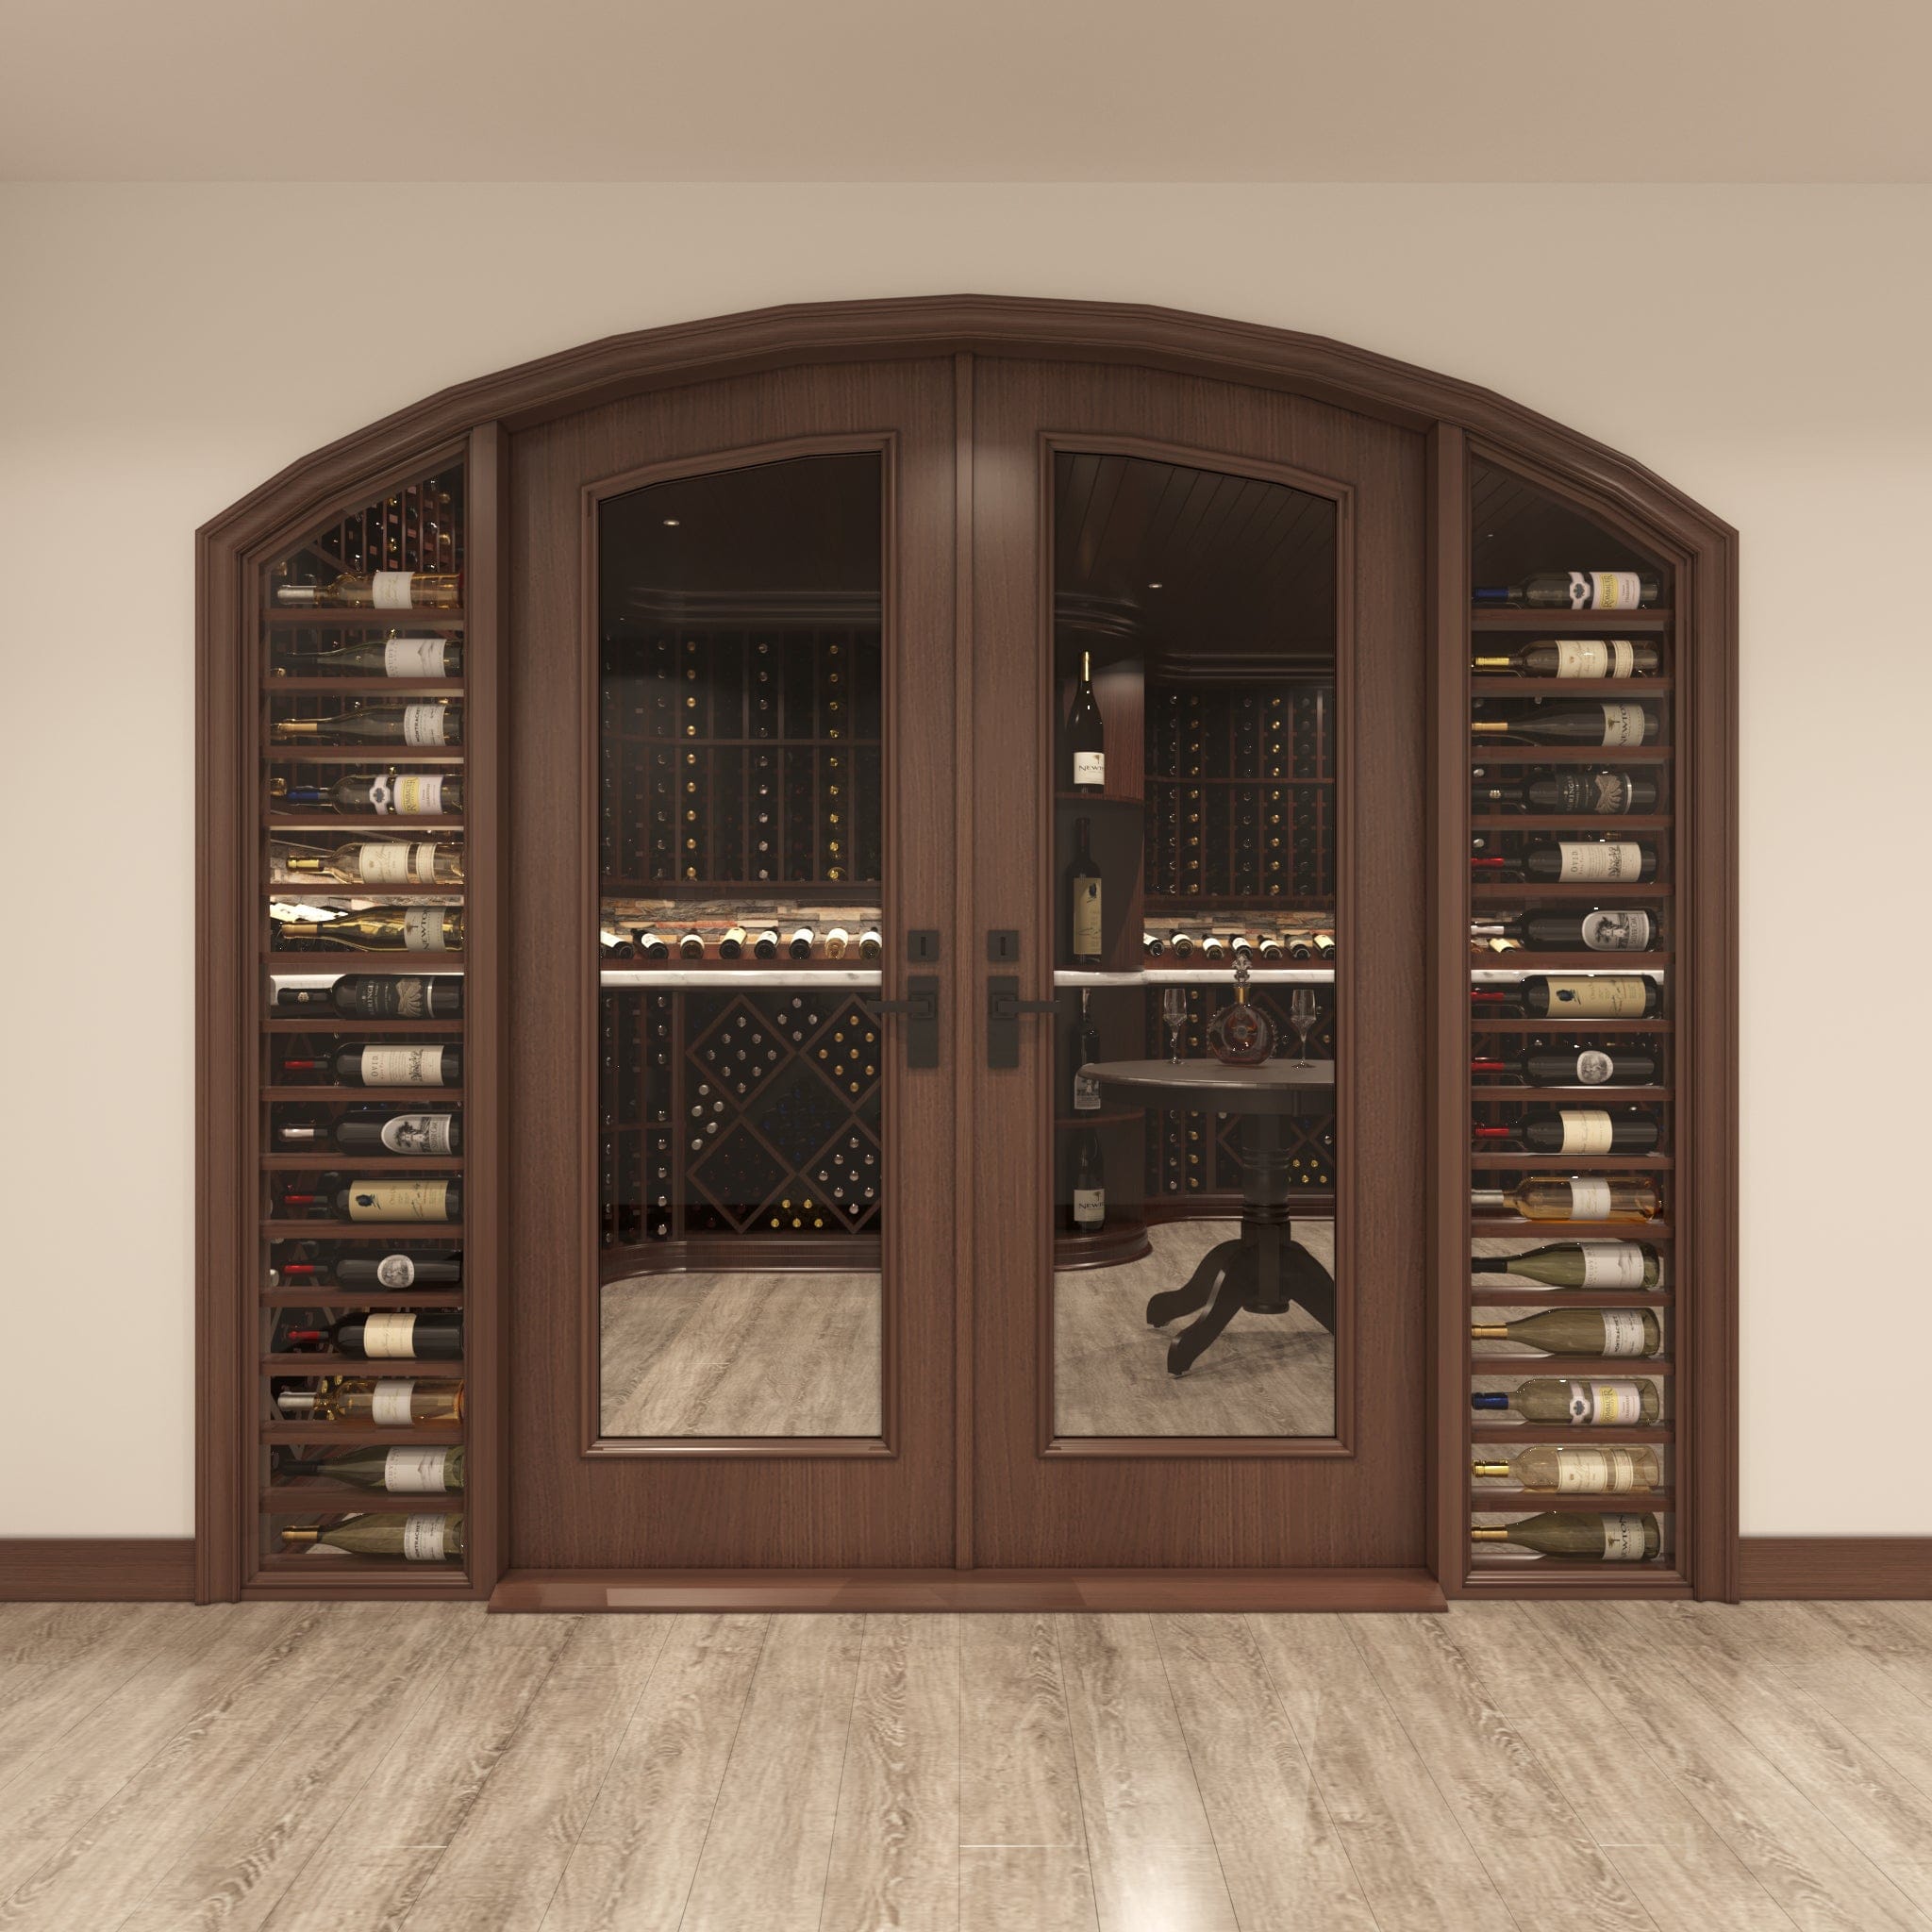 Full Glass Double Arched Cellar Door, 2 Sidelights w/ Horizontal Displays